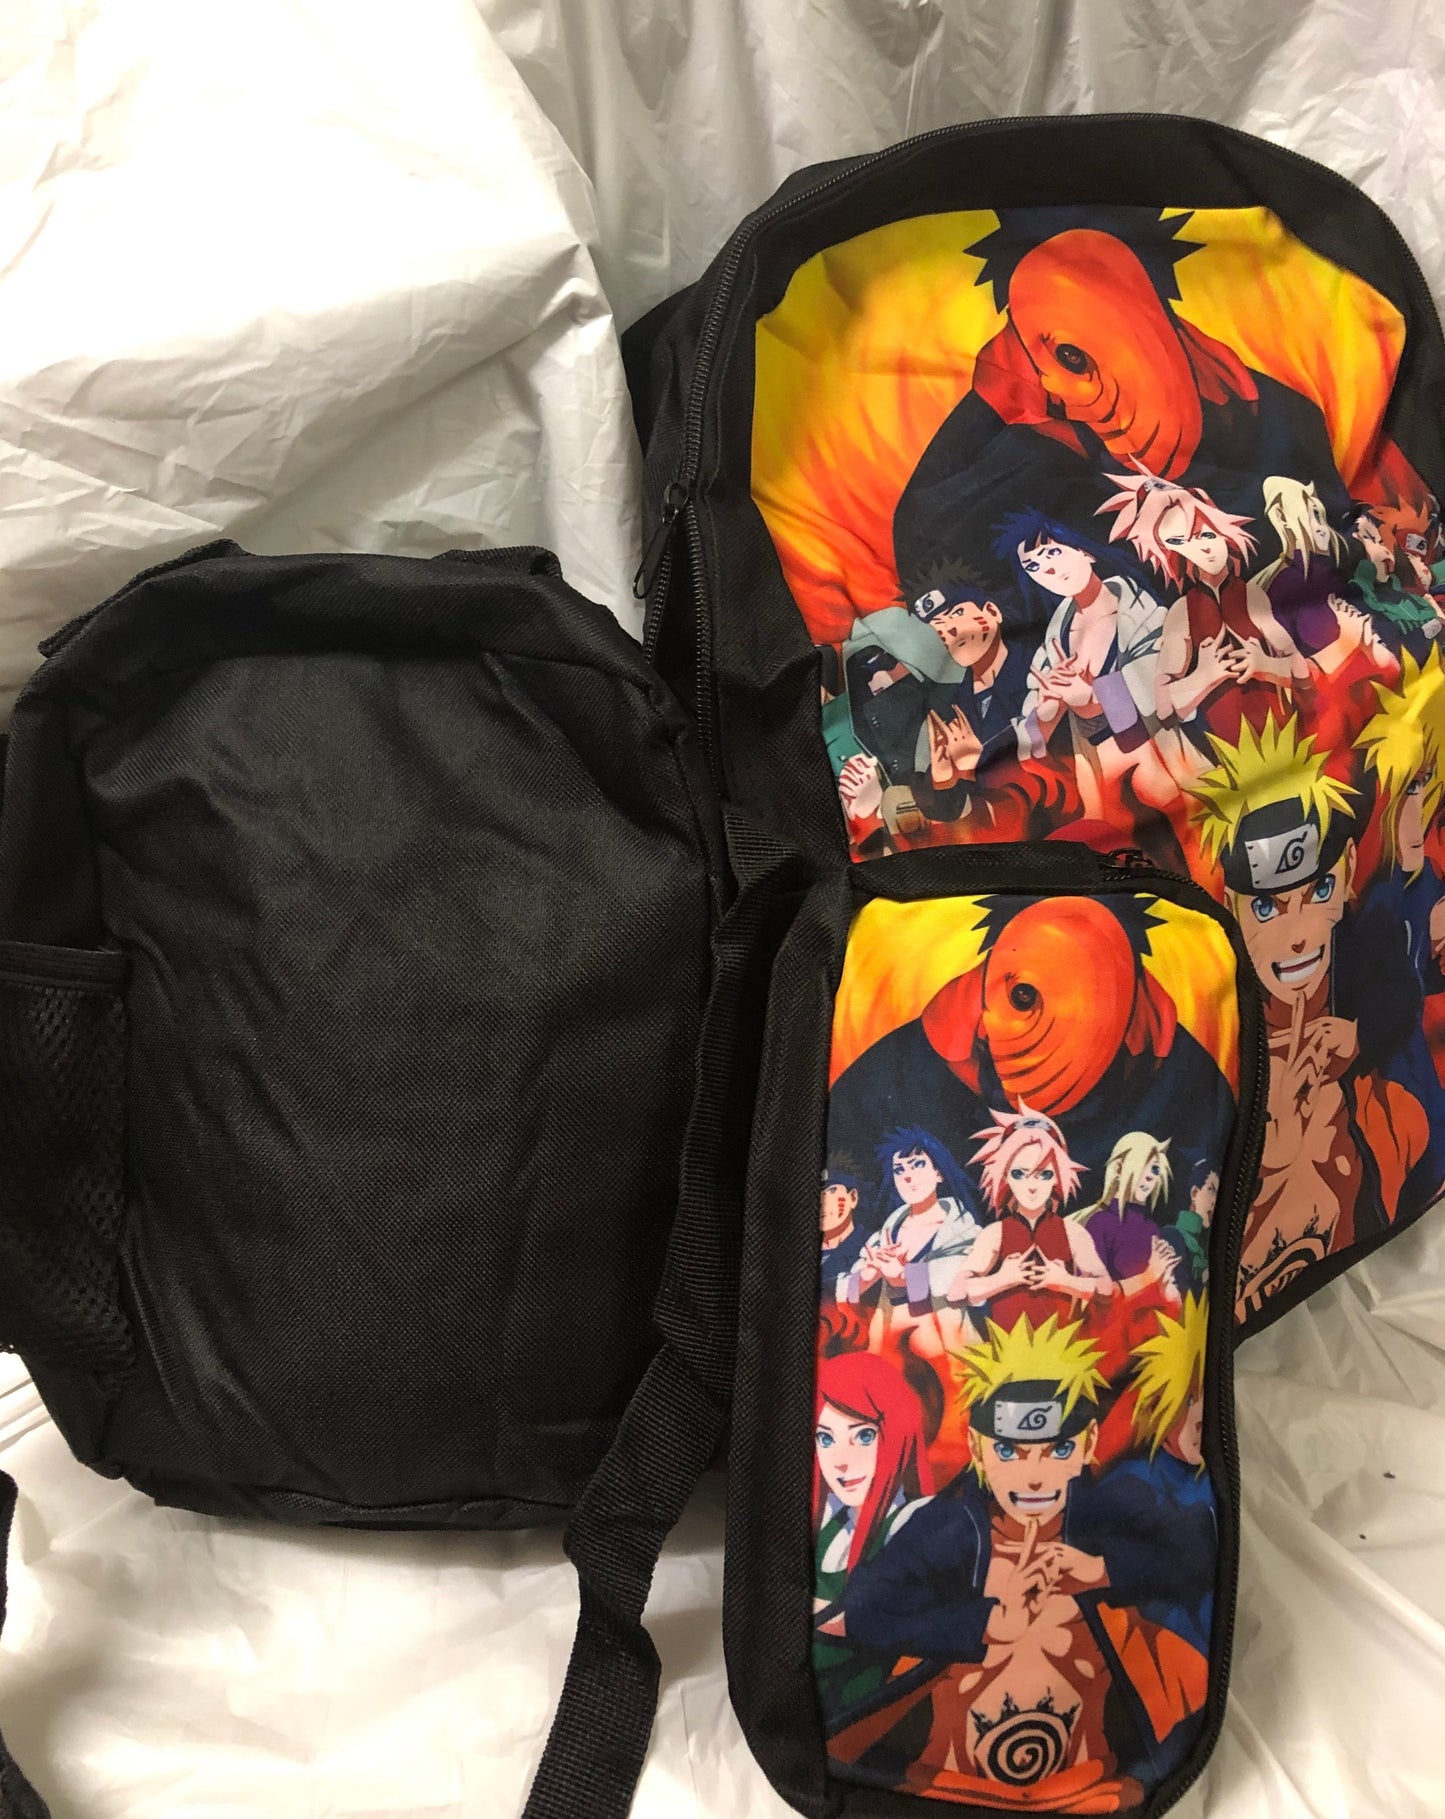 Anime Naruto Backpack For Adult Girl Or Boy "New Arrival"